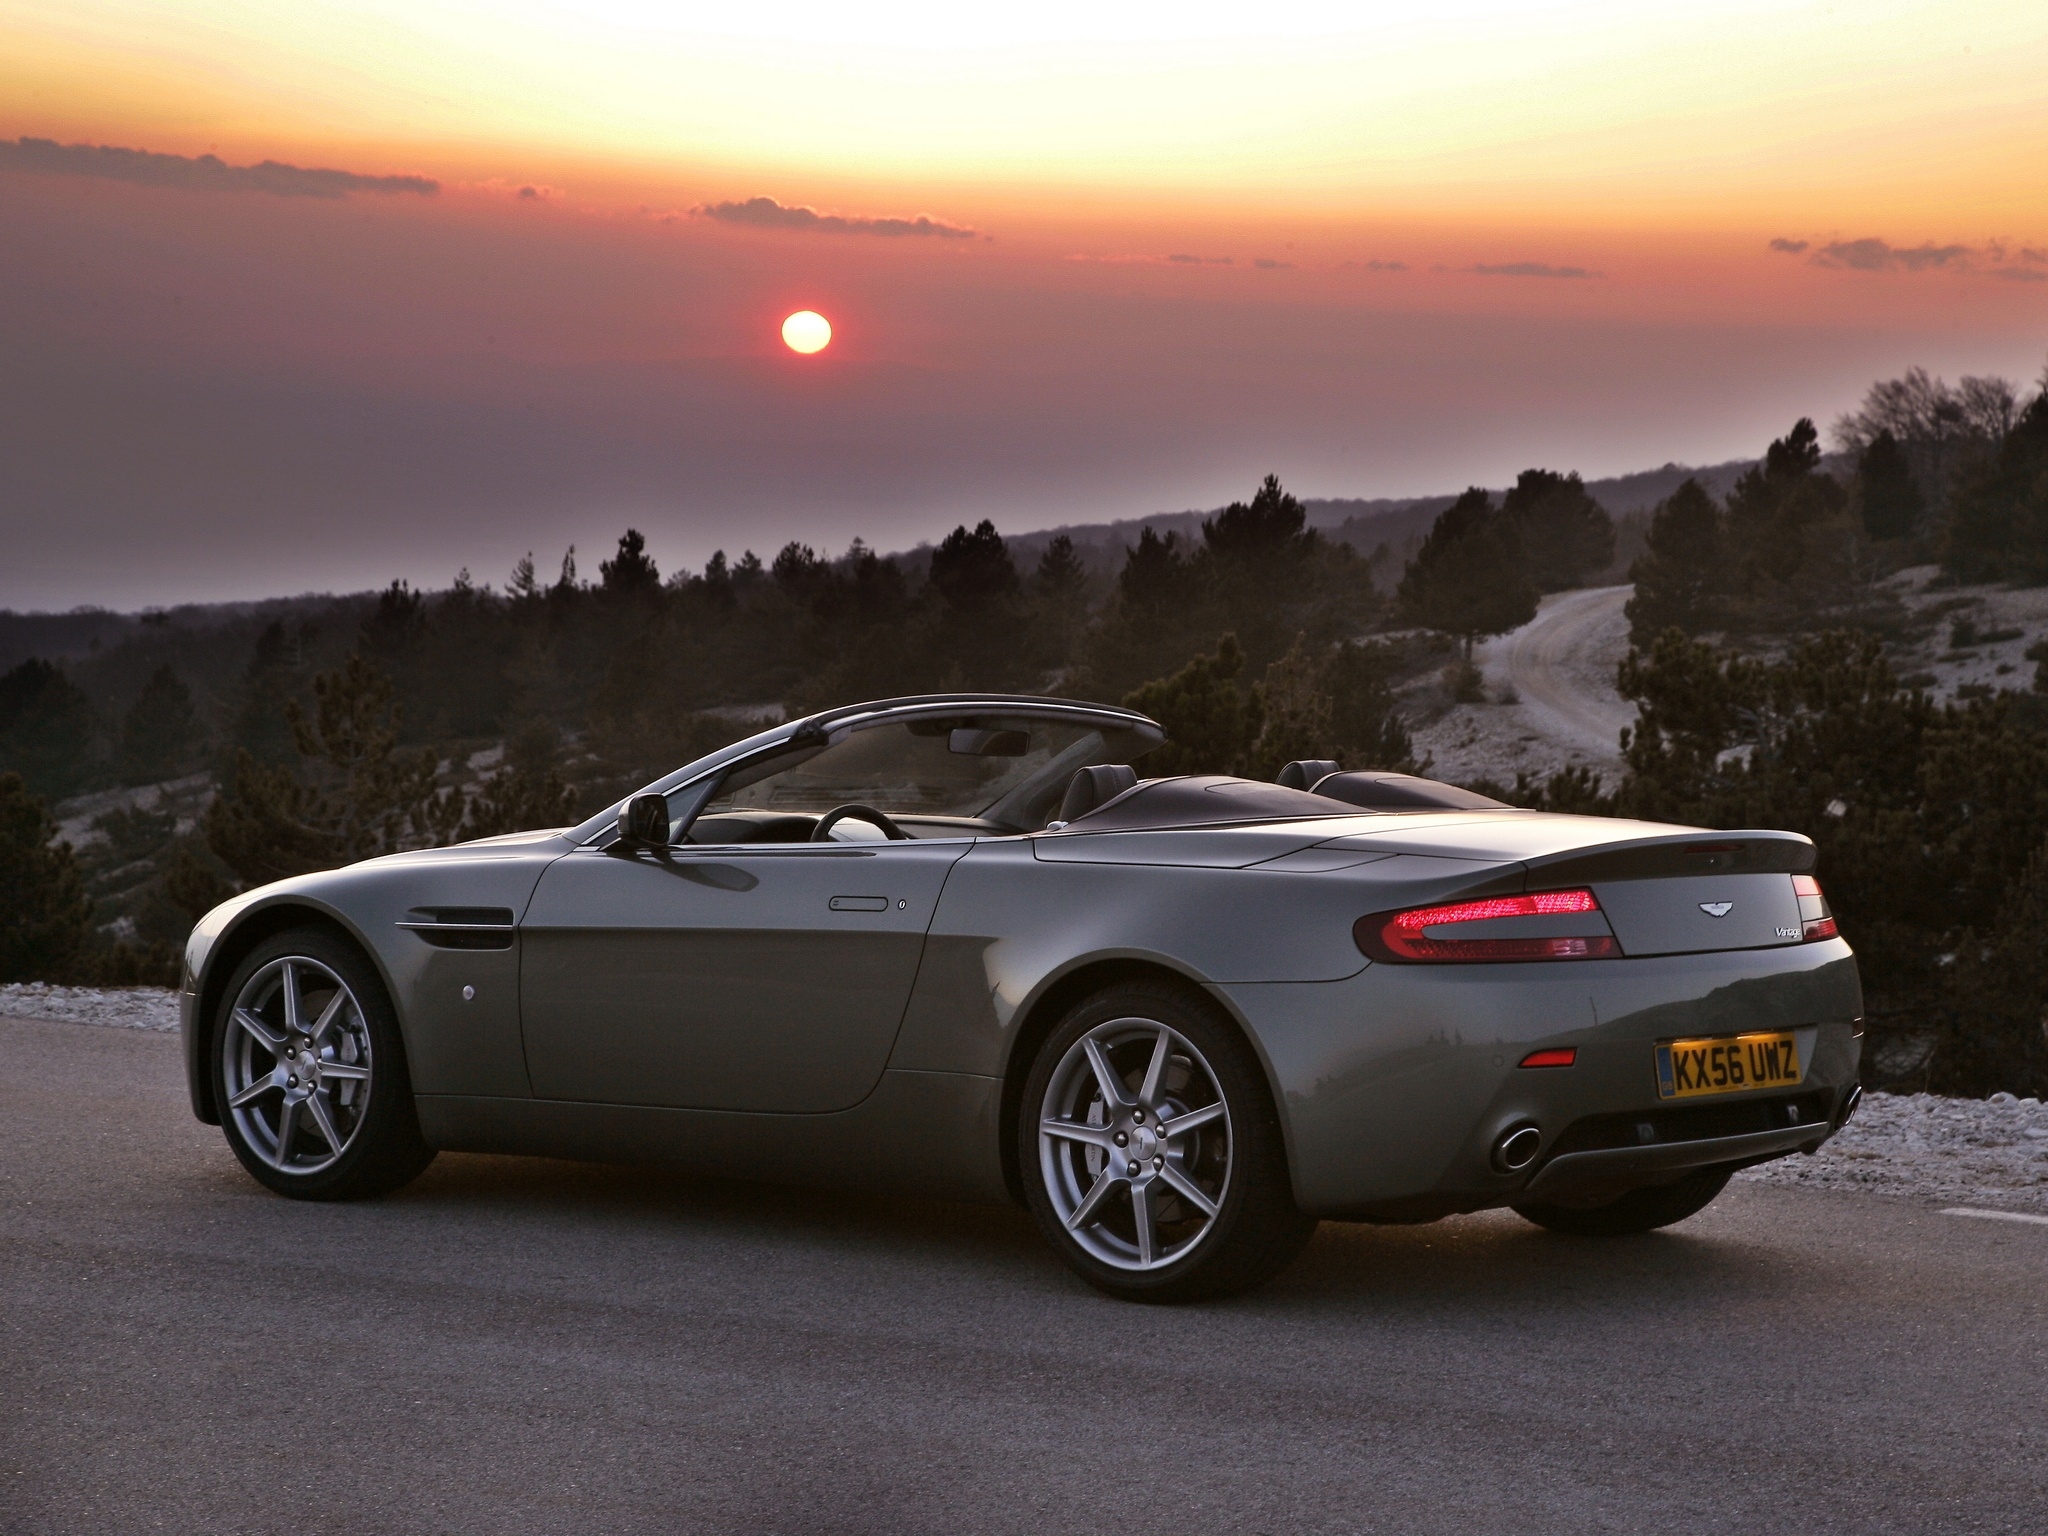 100828 download wallpaper auto, trees, sunset, aston martin, cars, grey, side view, v8, 2006 screensavers and pictures for free